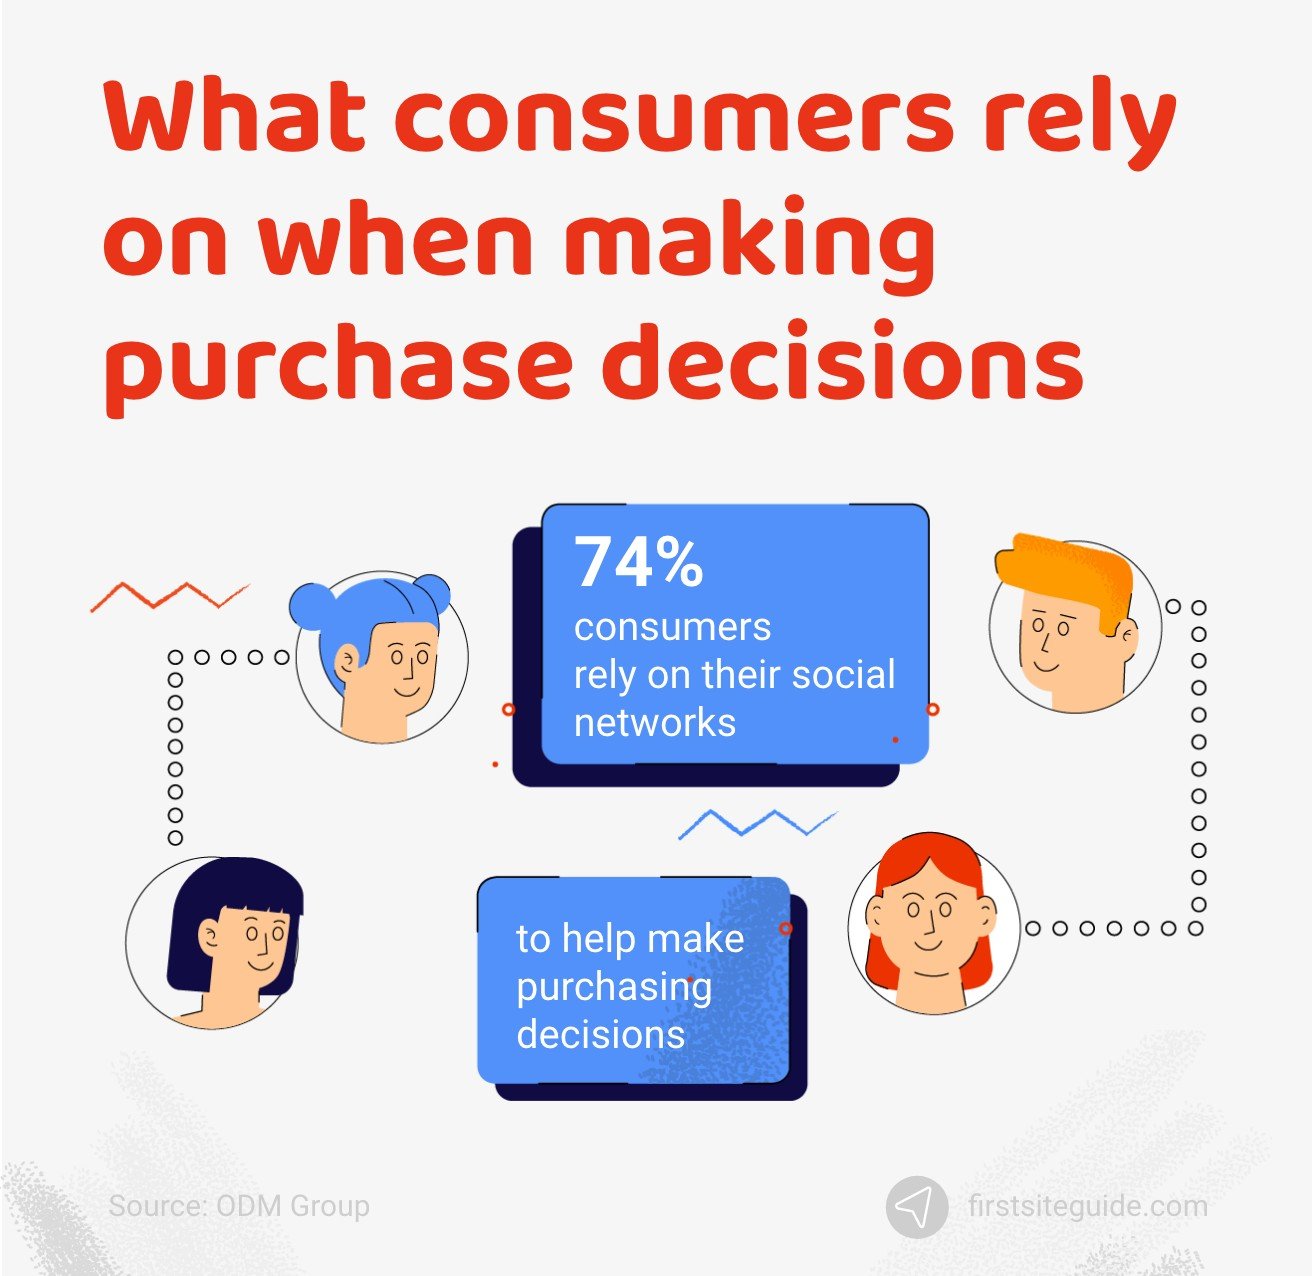 What consumers rely on when making purchase decisions